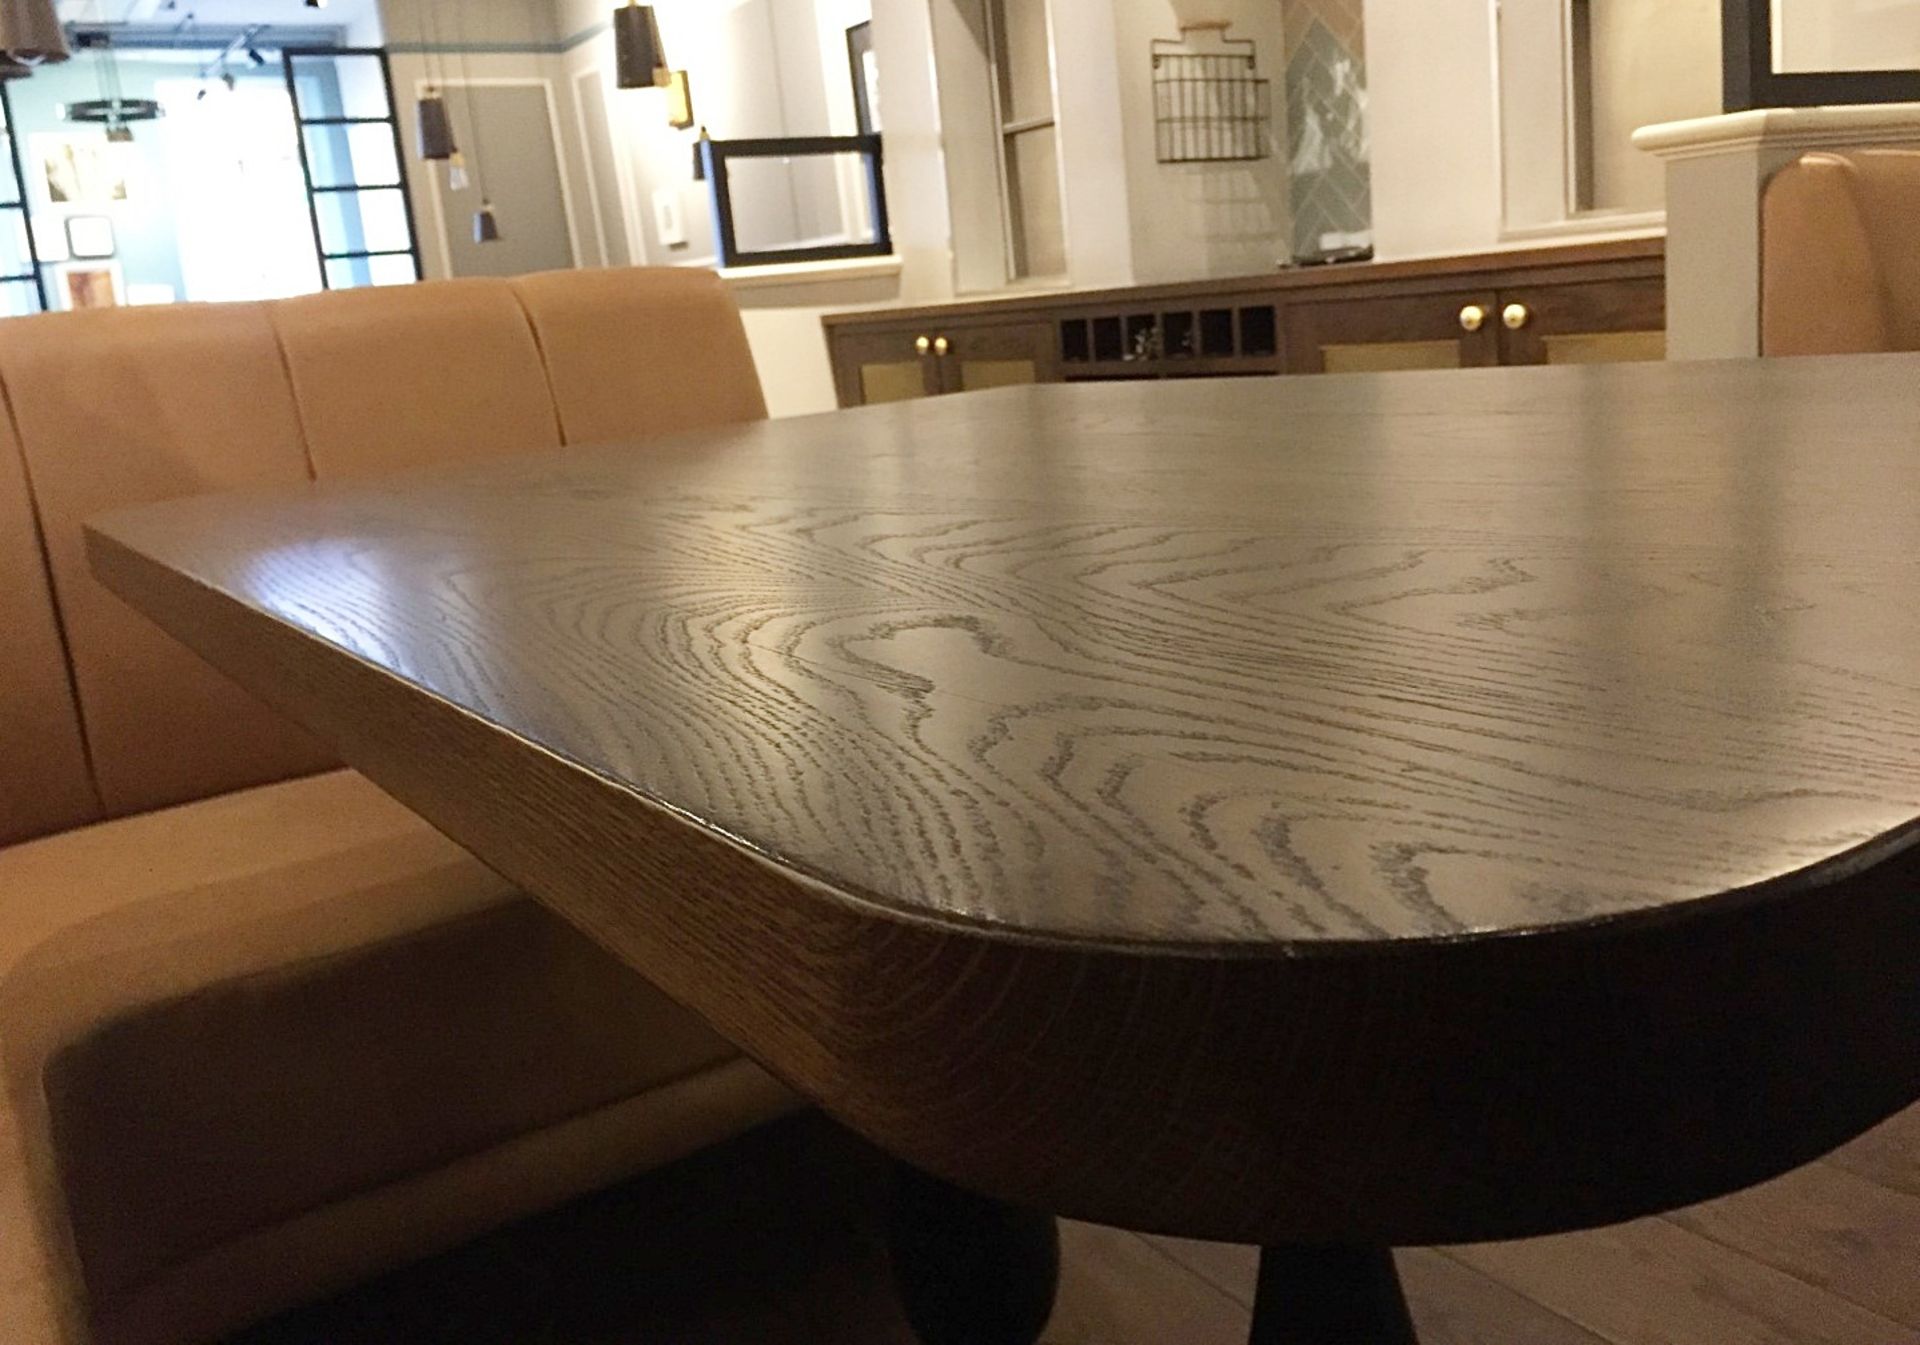 1 x Luxurious High End Shaped Restaurant Table - Features A Stunning Solid Wood Top With A - Image 5 of 10